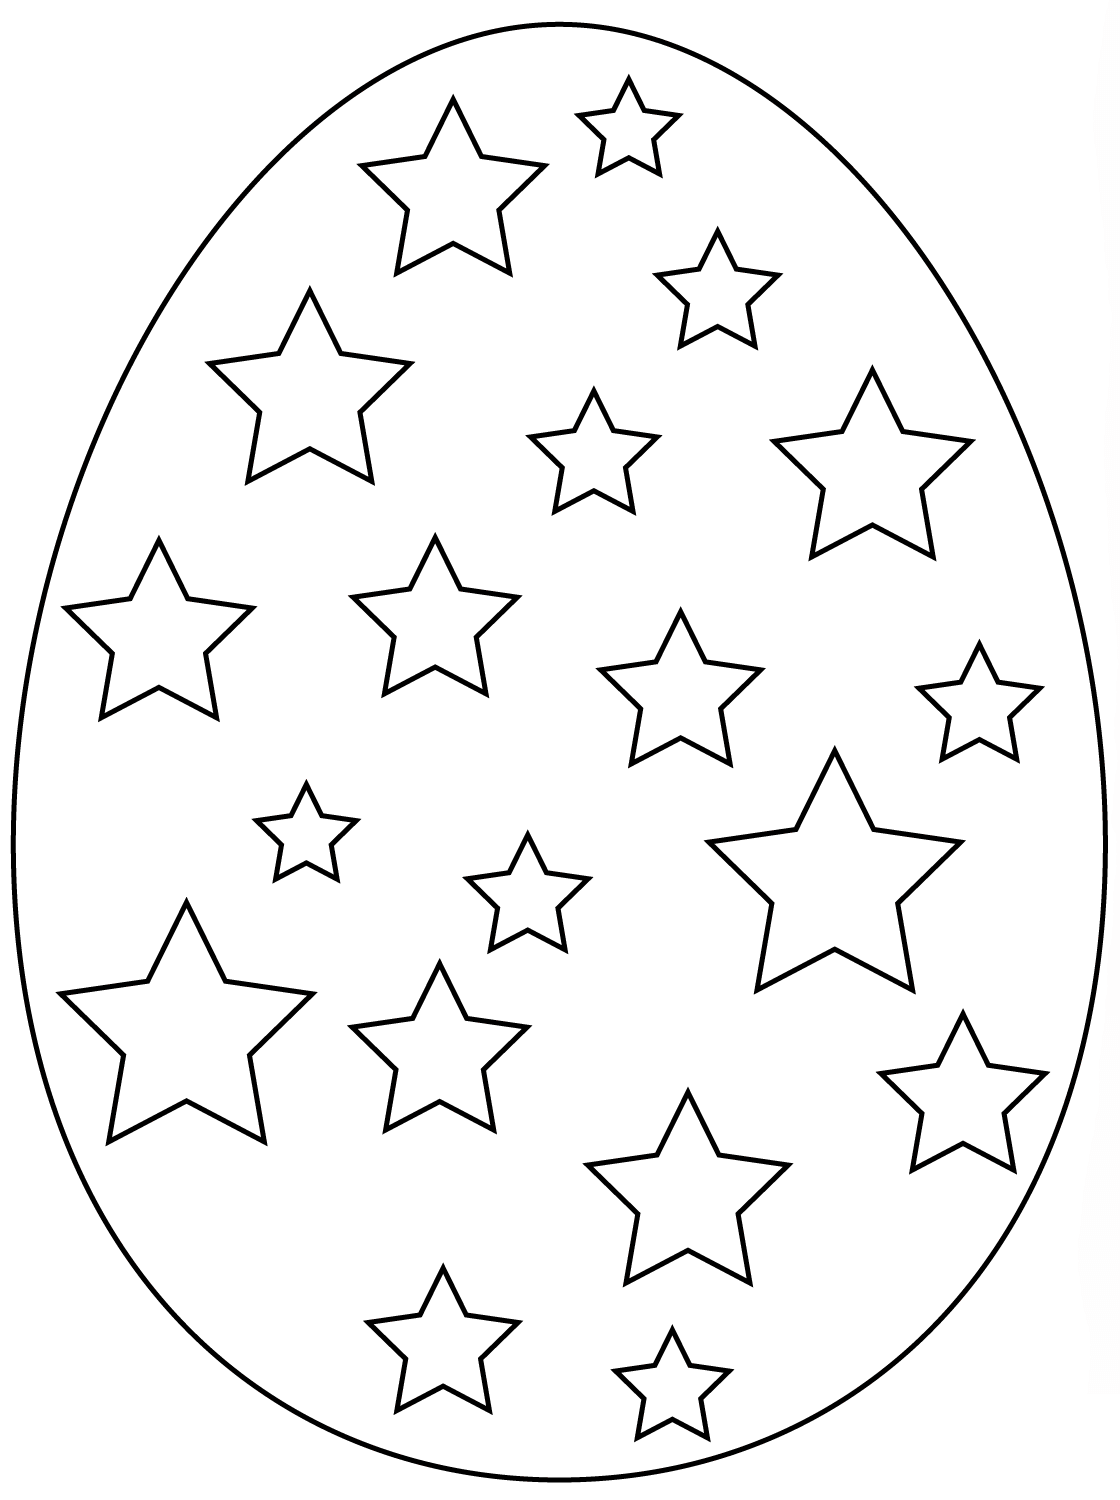 Easter Egg With Stars Coloring Page